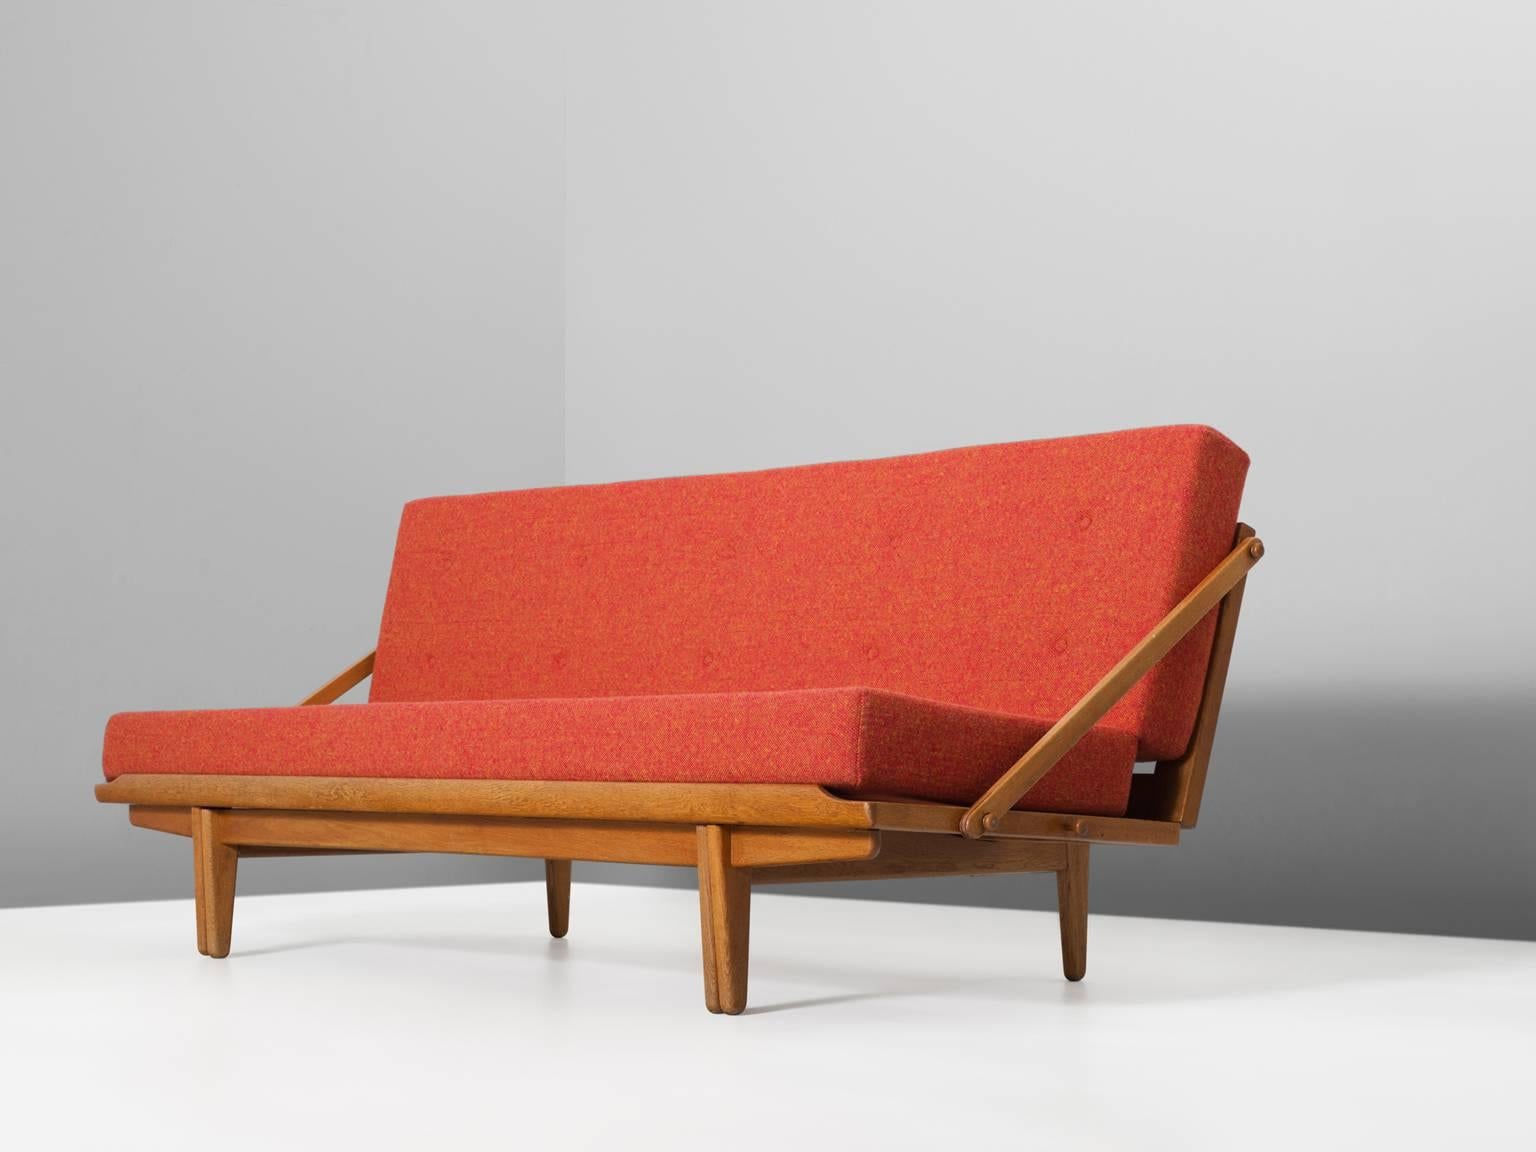 Sofabed in oak and fabric, Scandinavia 1950s.

Sofa which could easily be transformed into a bed. The oak frame has a sincere design. Nice detail is the lattice back. A very open appearance with floating character. Upholstered in organ colored